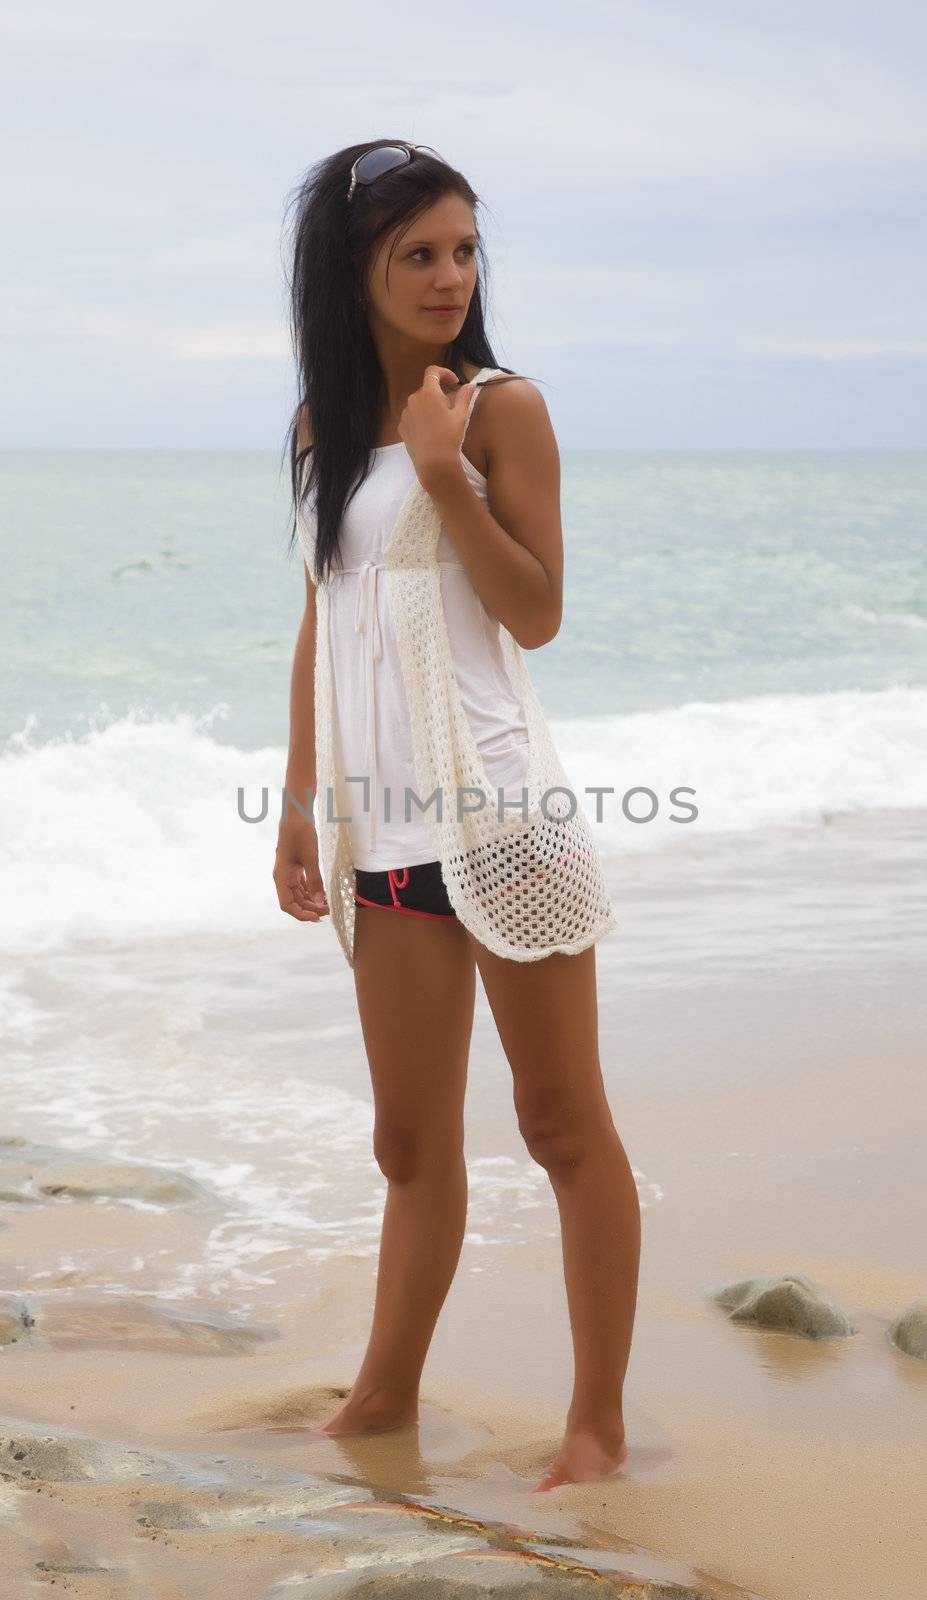 Slim brunette on a beach in a white dress against a background of sea waves